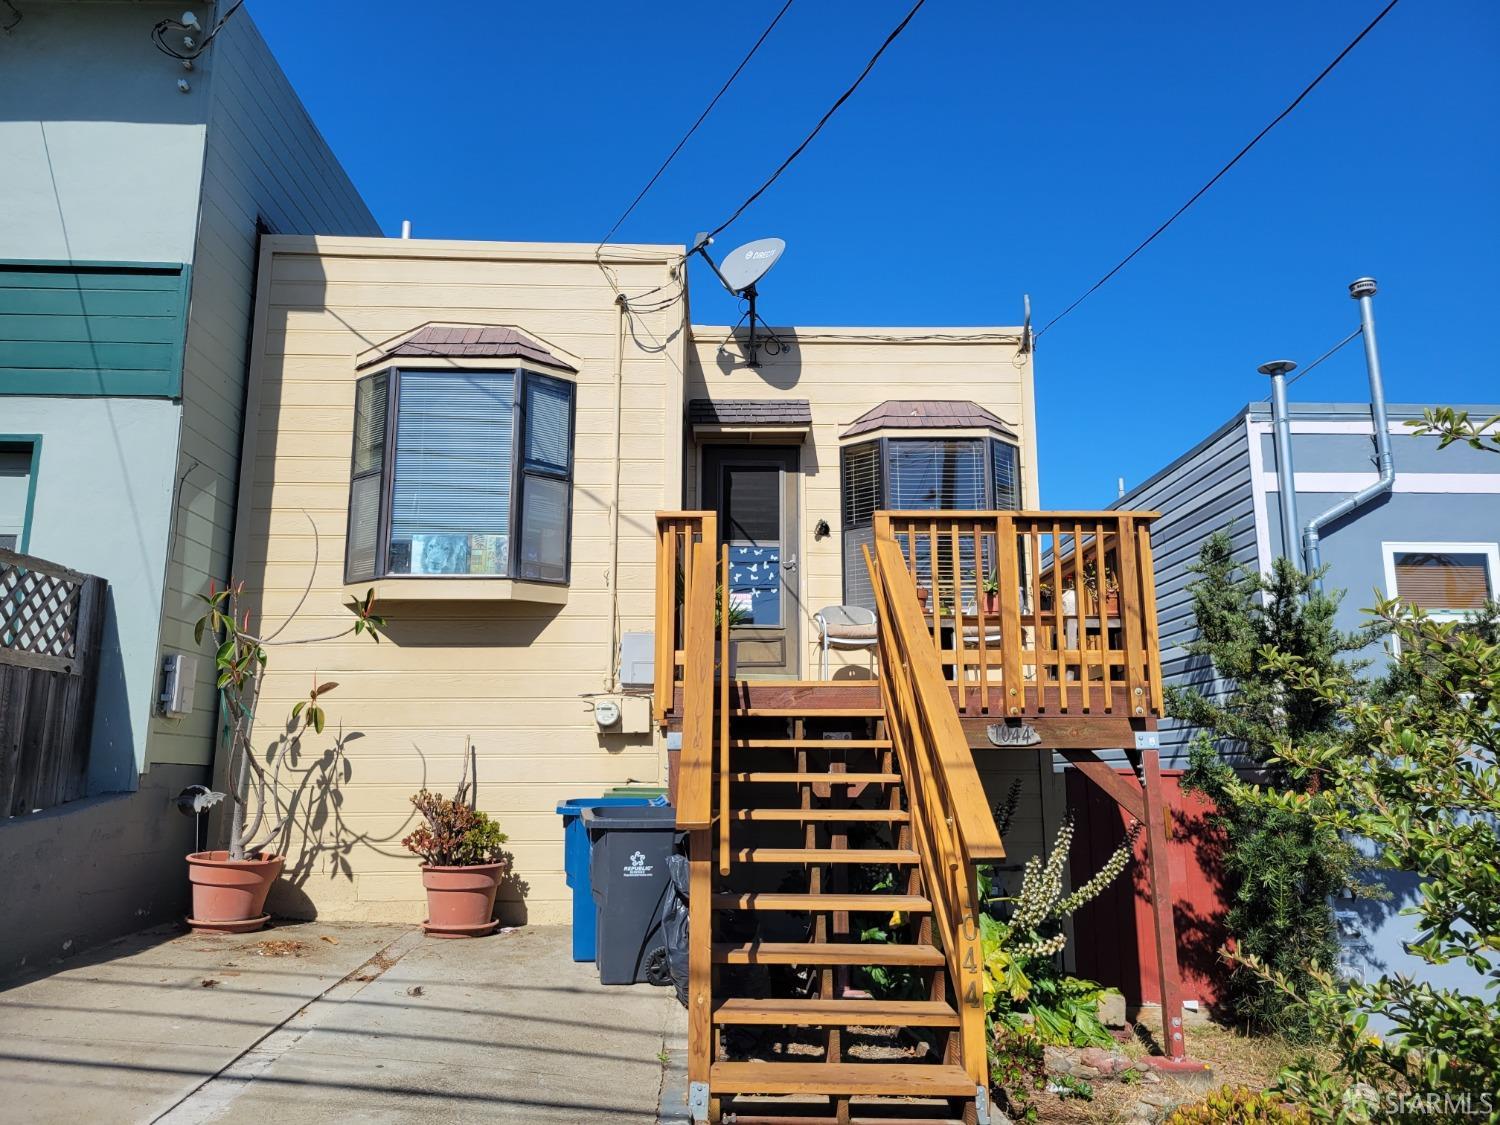 Photo of 1044 Schwerin St in Daly City, CA